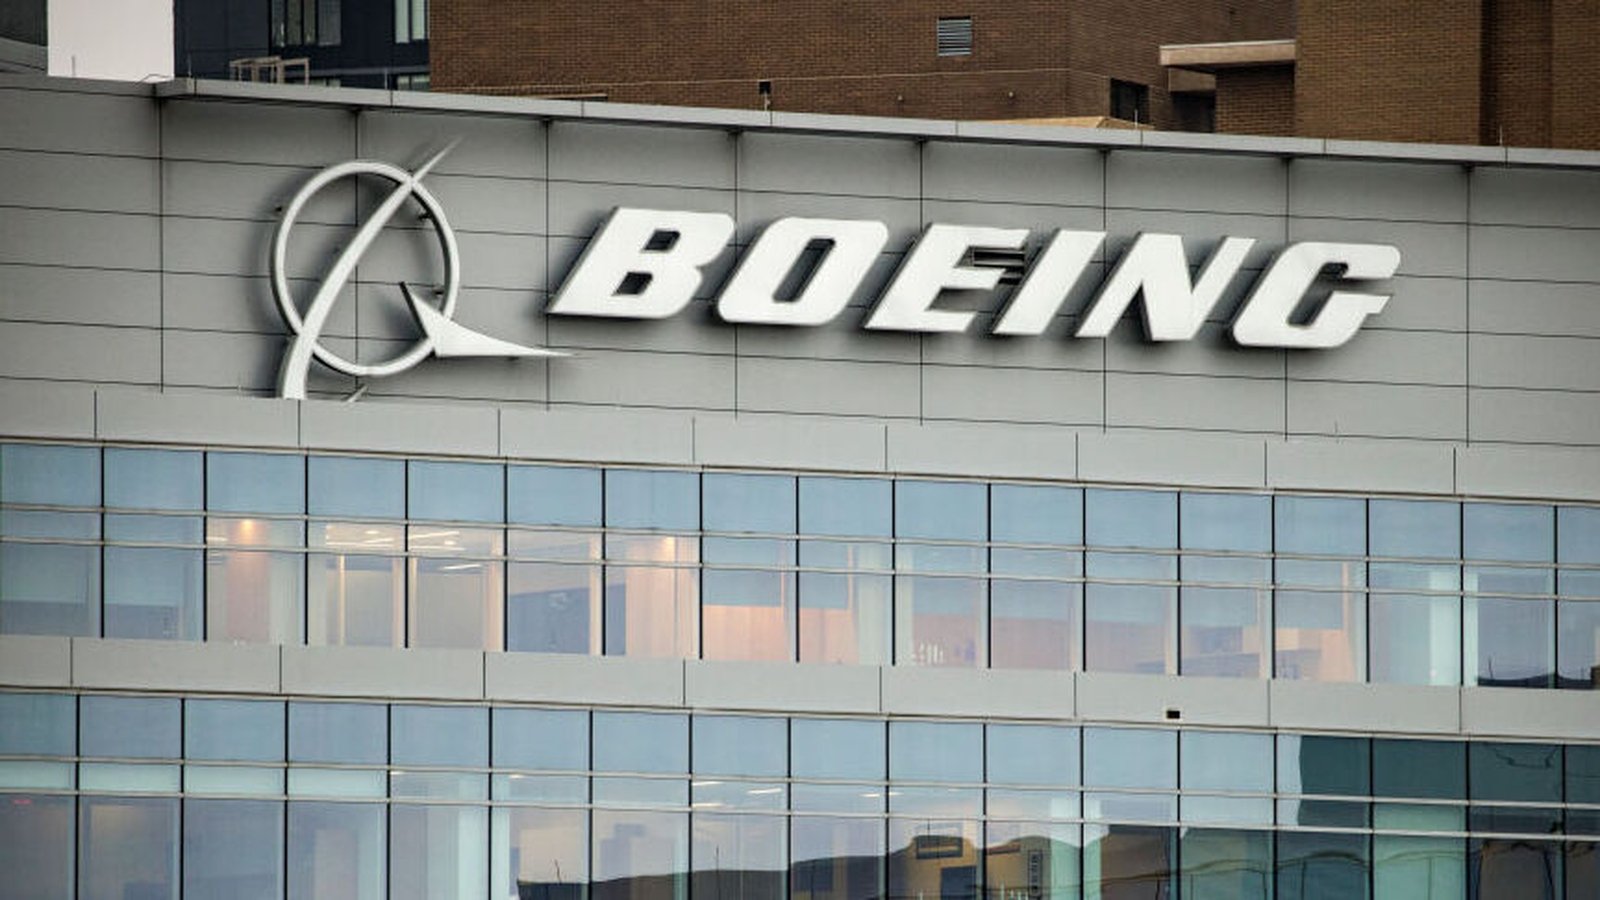 New Boeing boss says planemaker faces pivotal moment